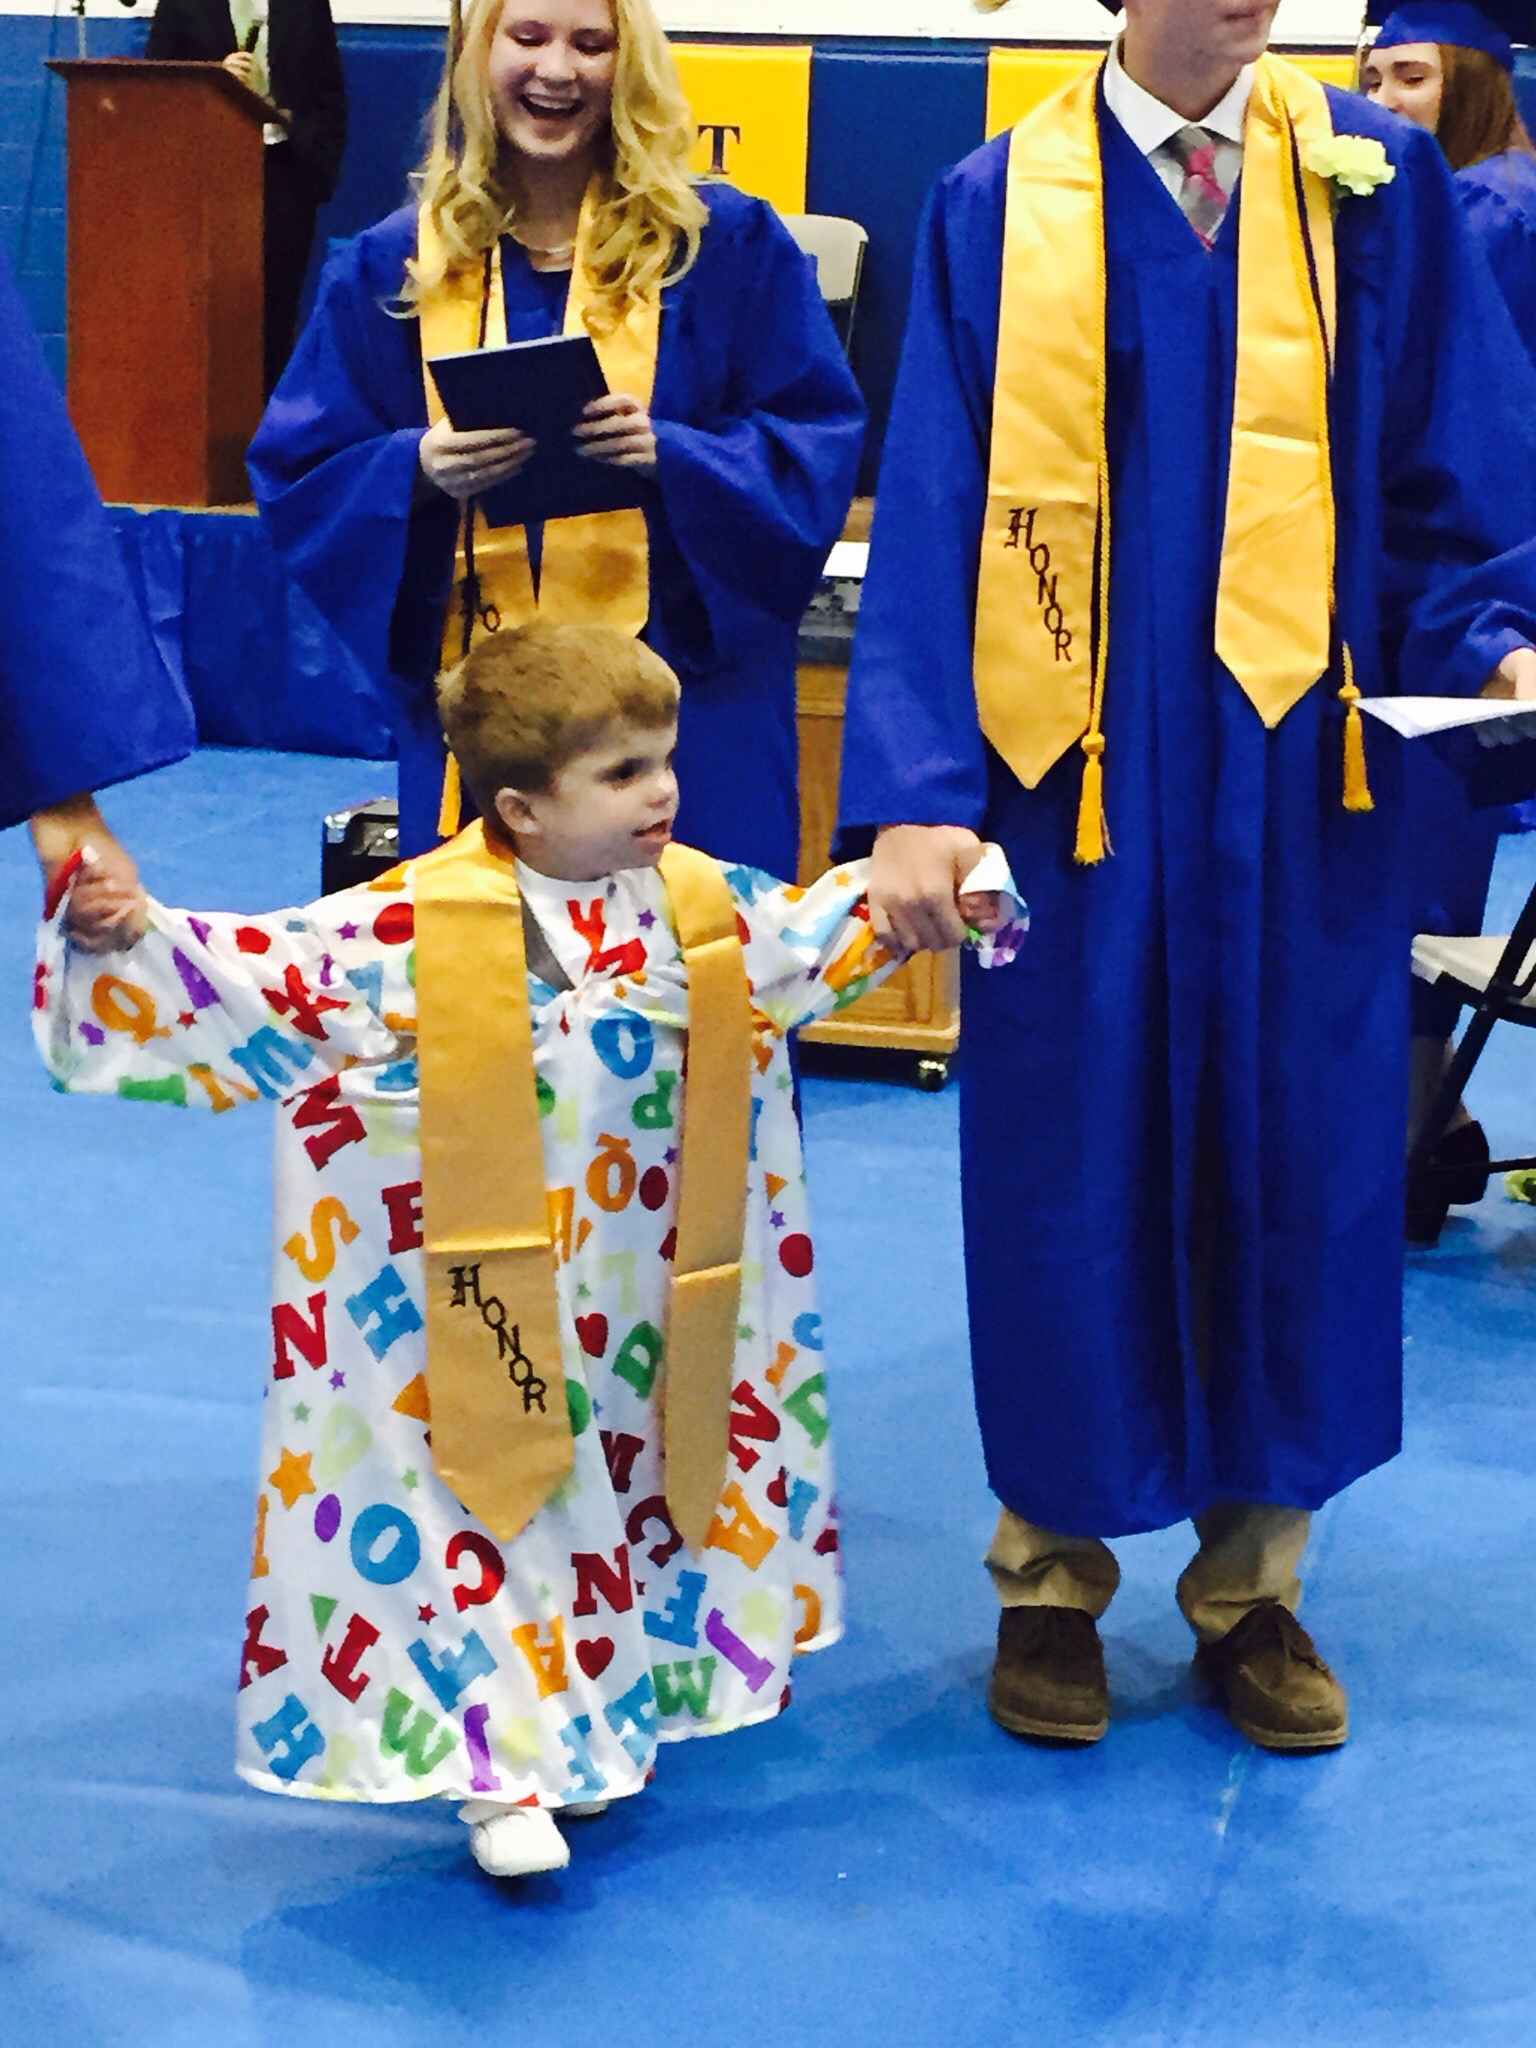 PHOTO: Jordan Planitz, 6, received an honorary diploma from Tri-City High School in Buffalo, Ill.